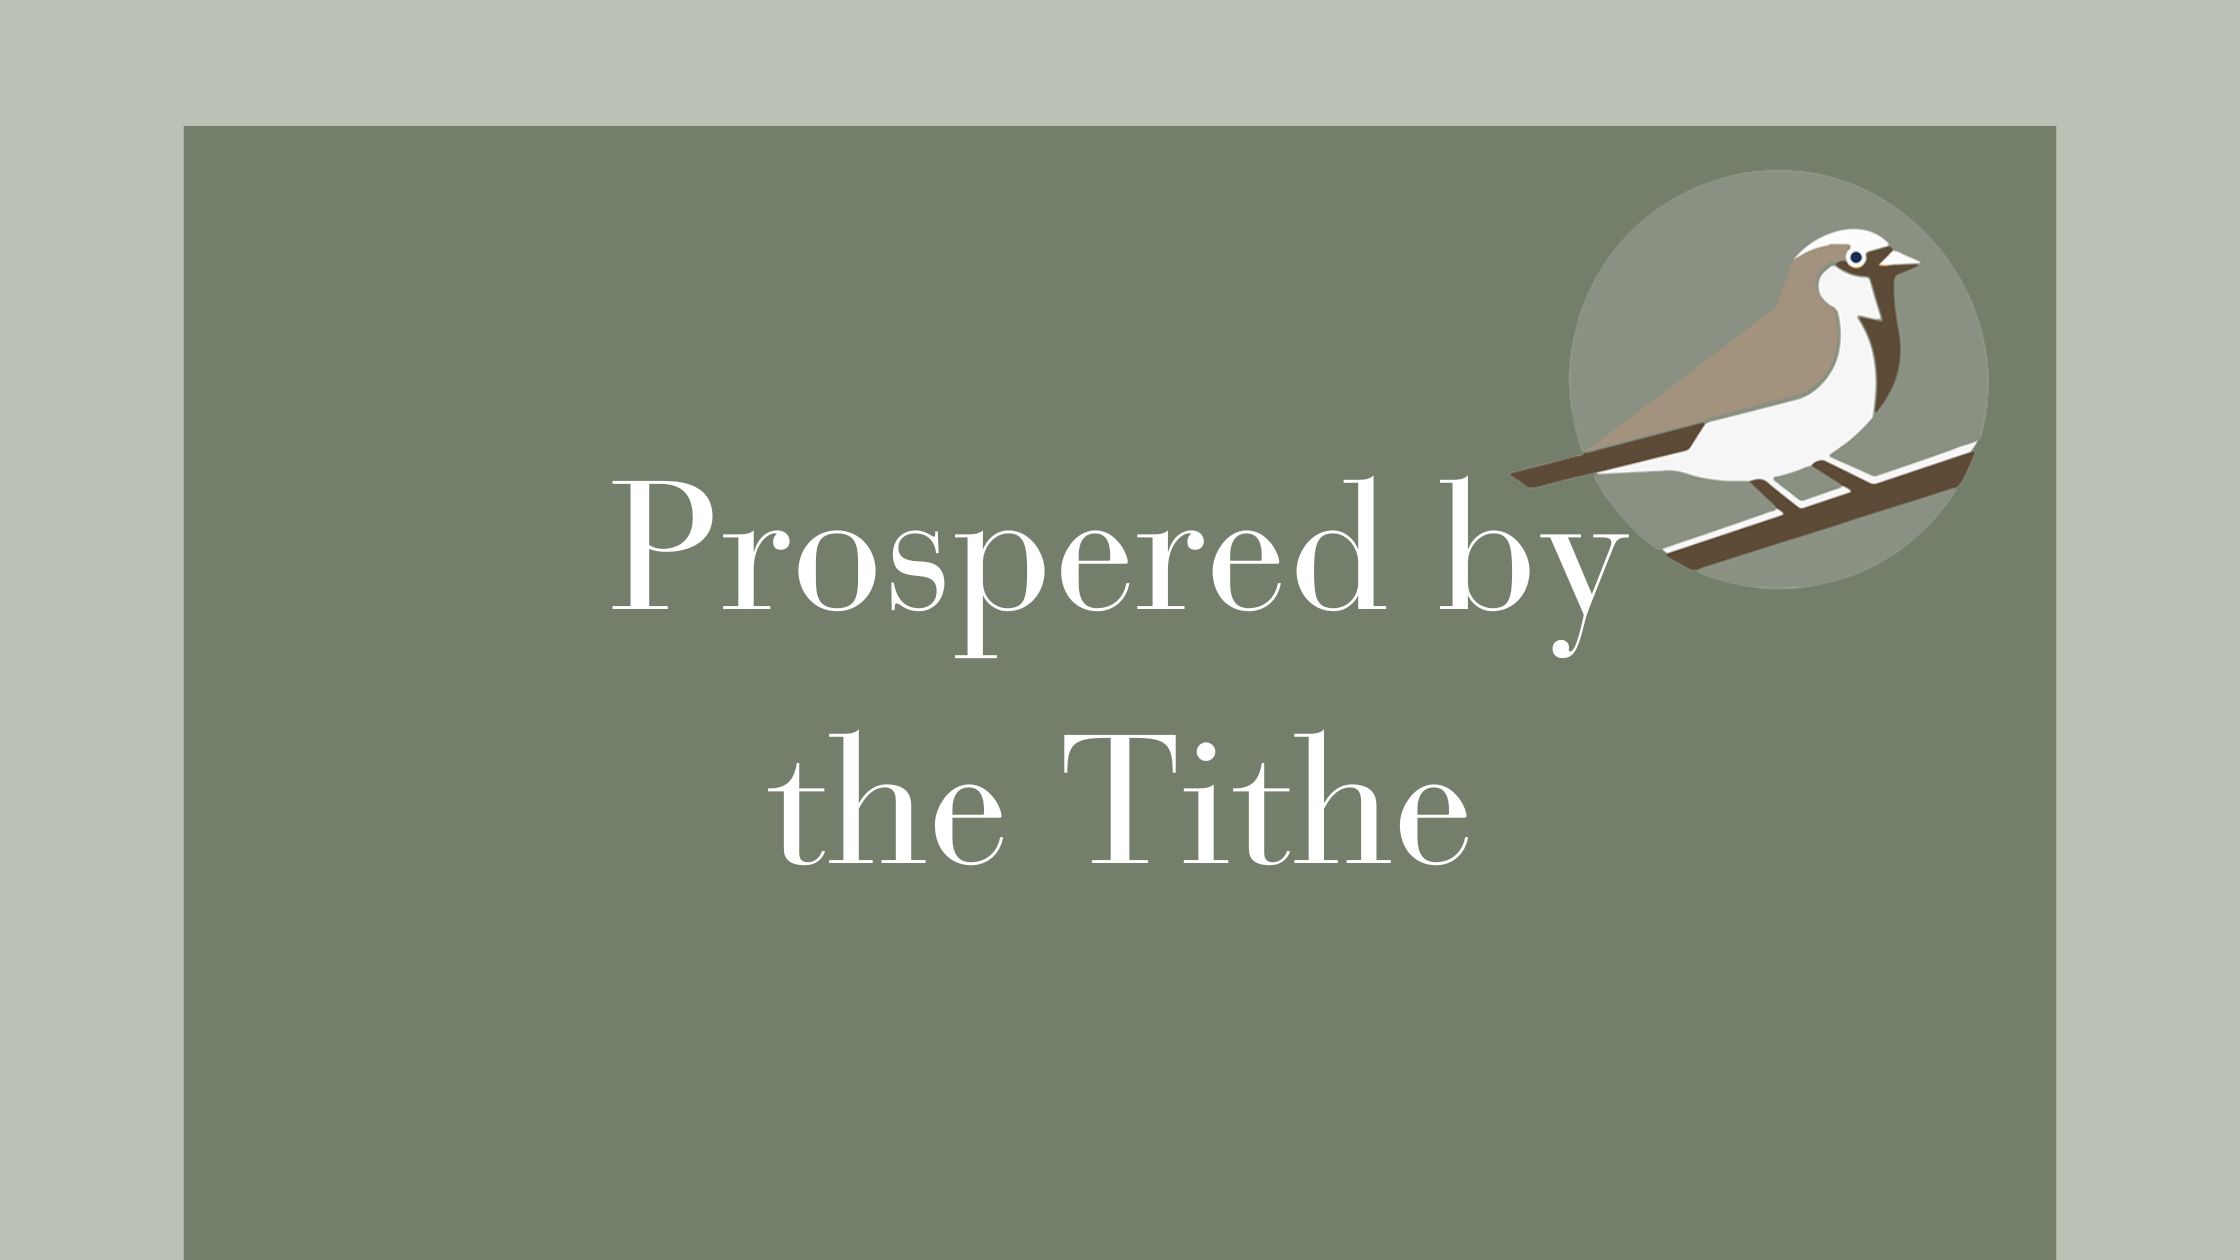 Prospered by the Tithe